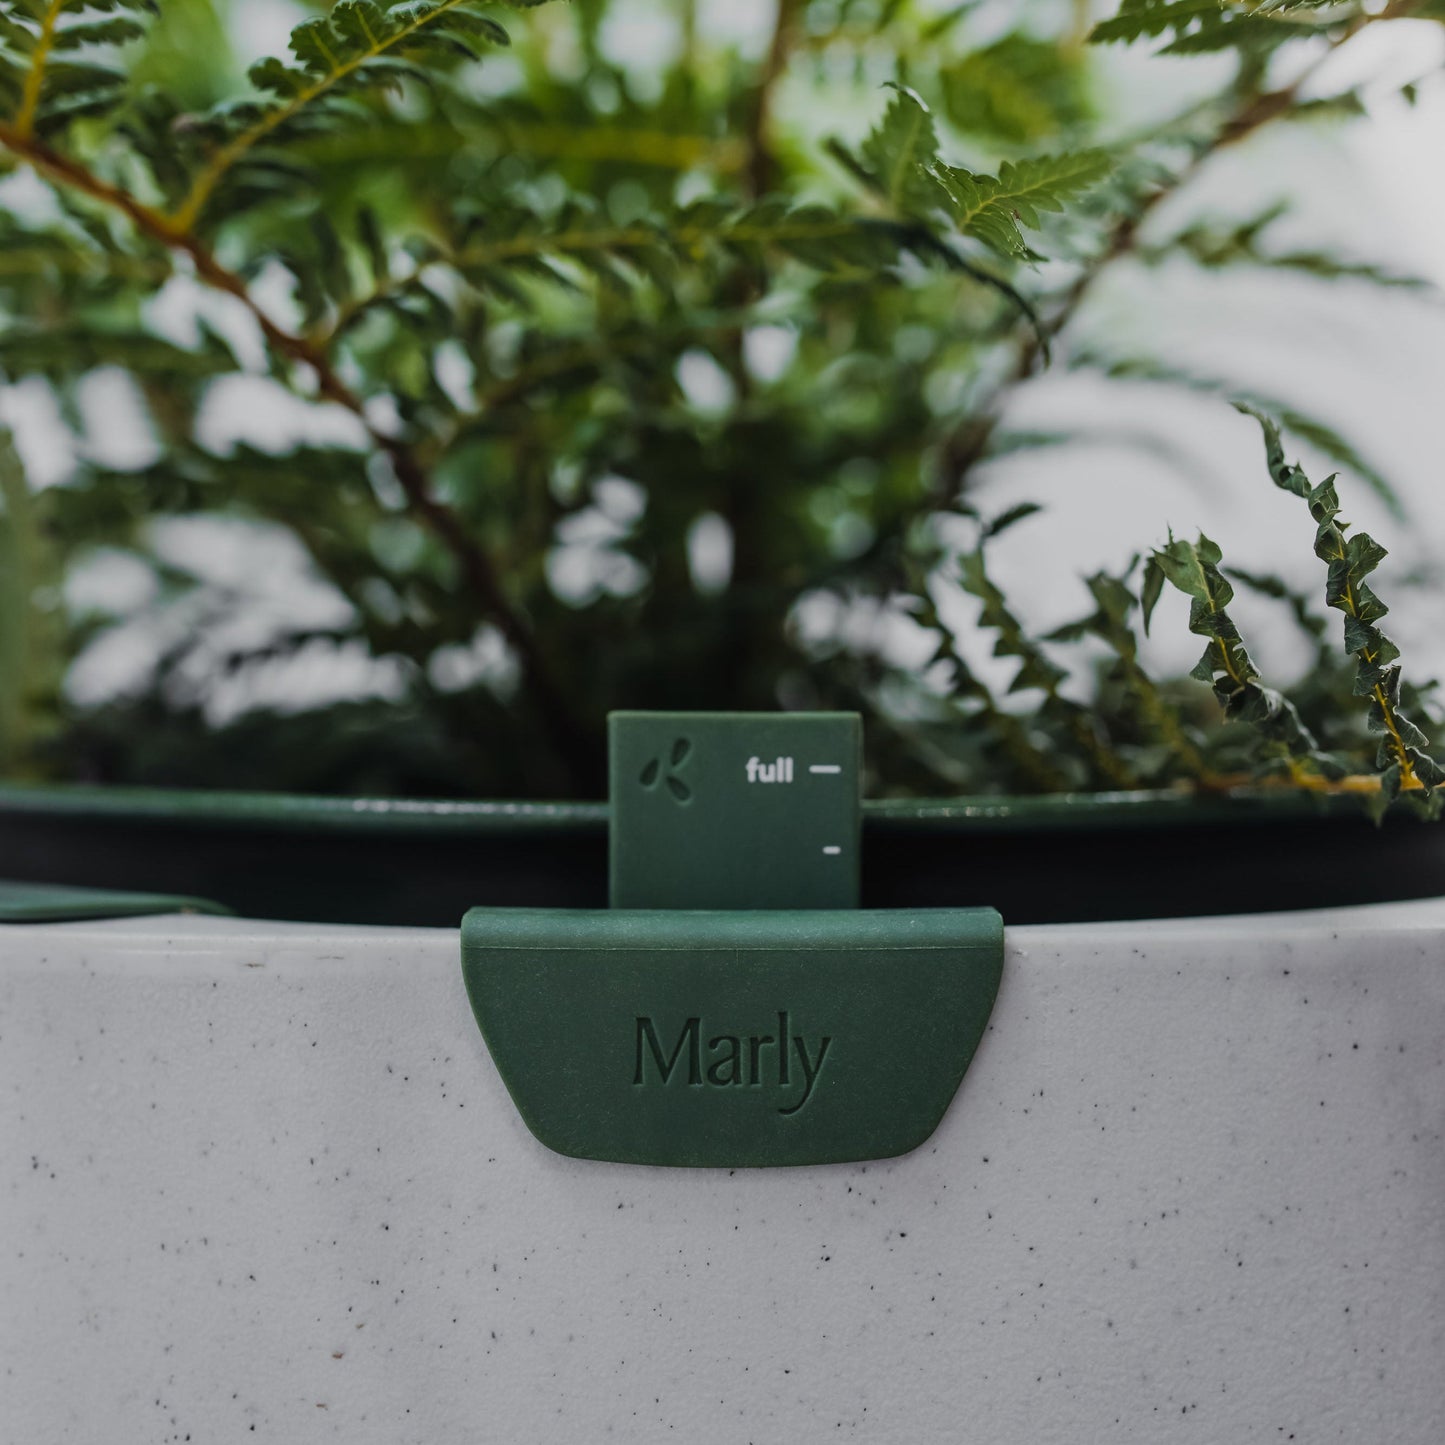 Marly’s Self-Watering Planter